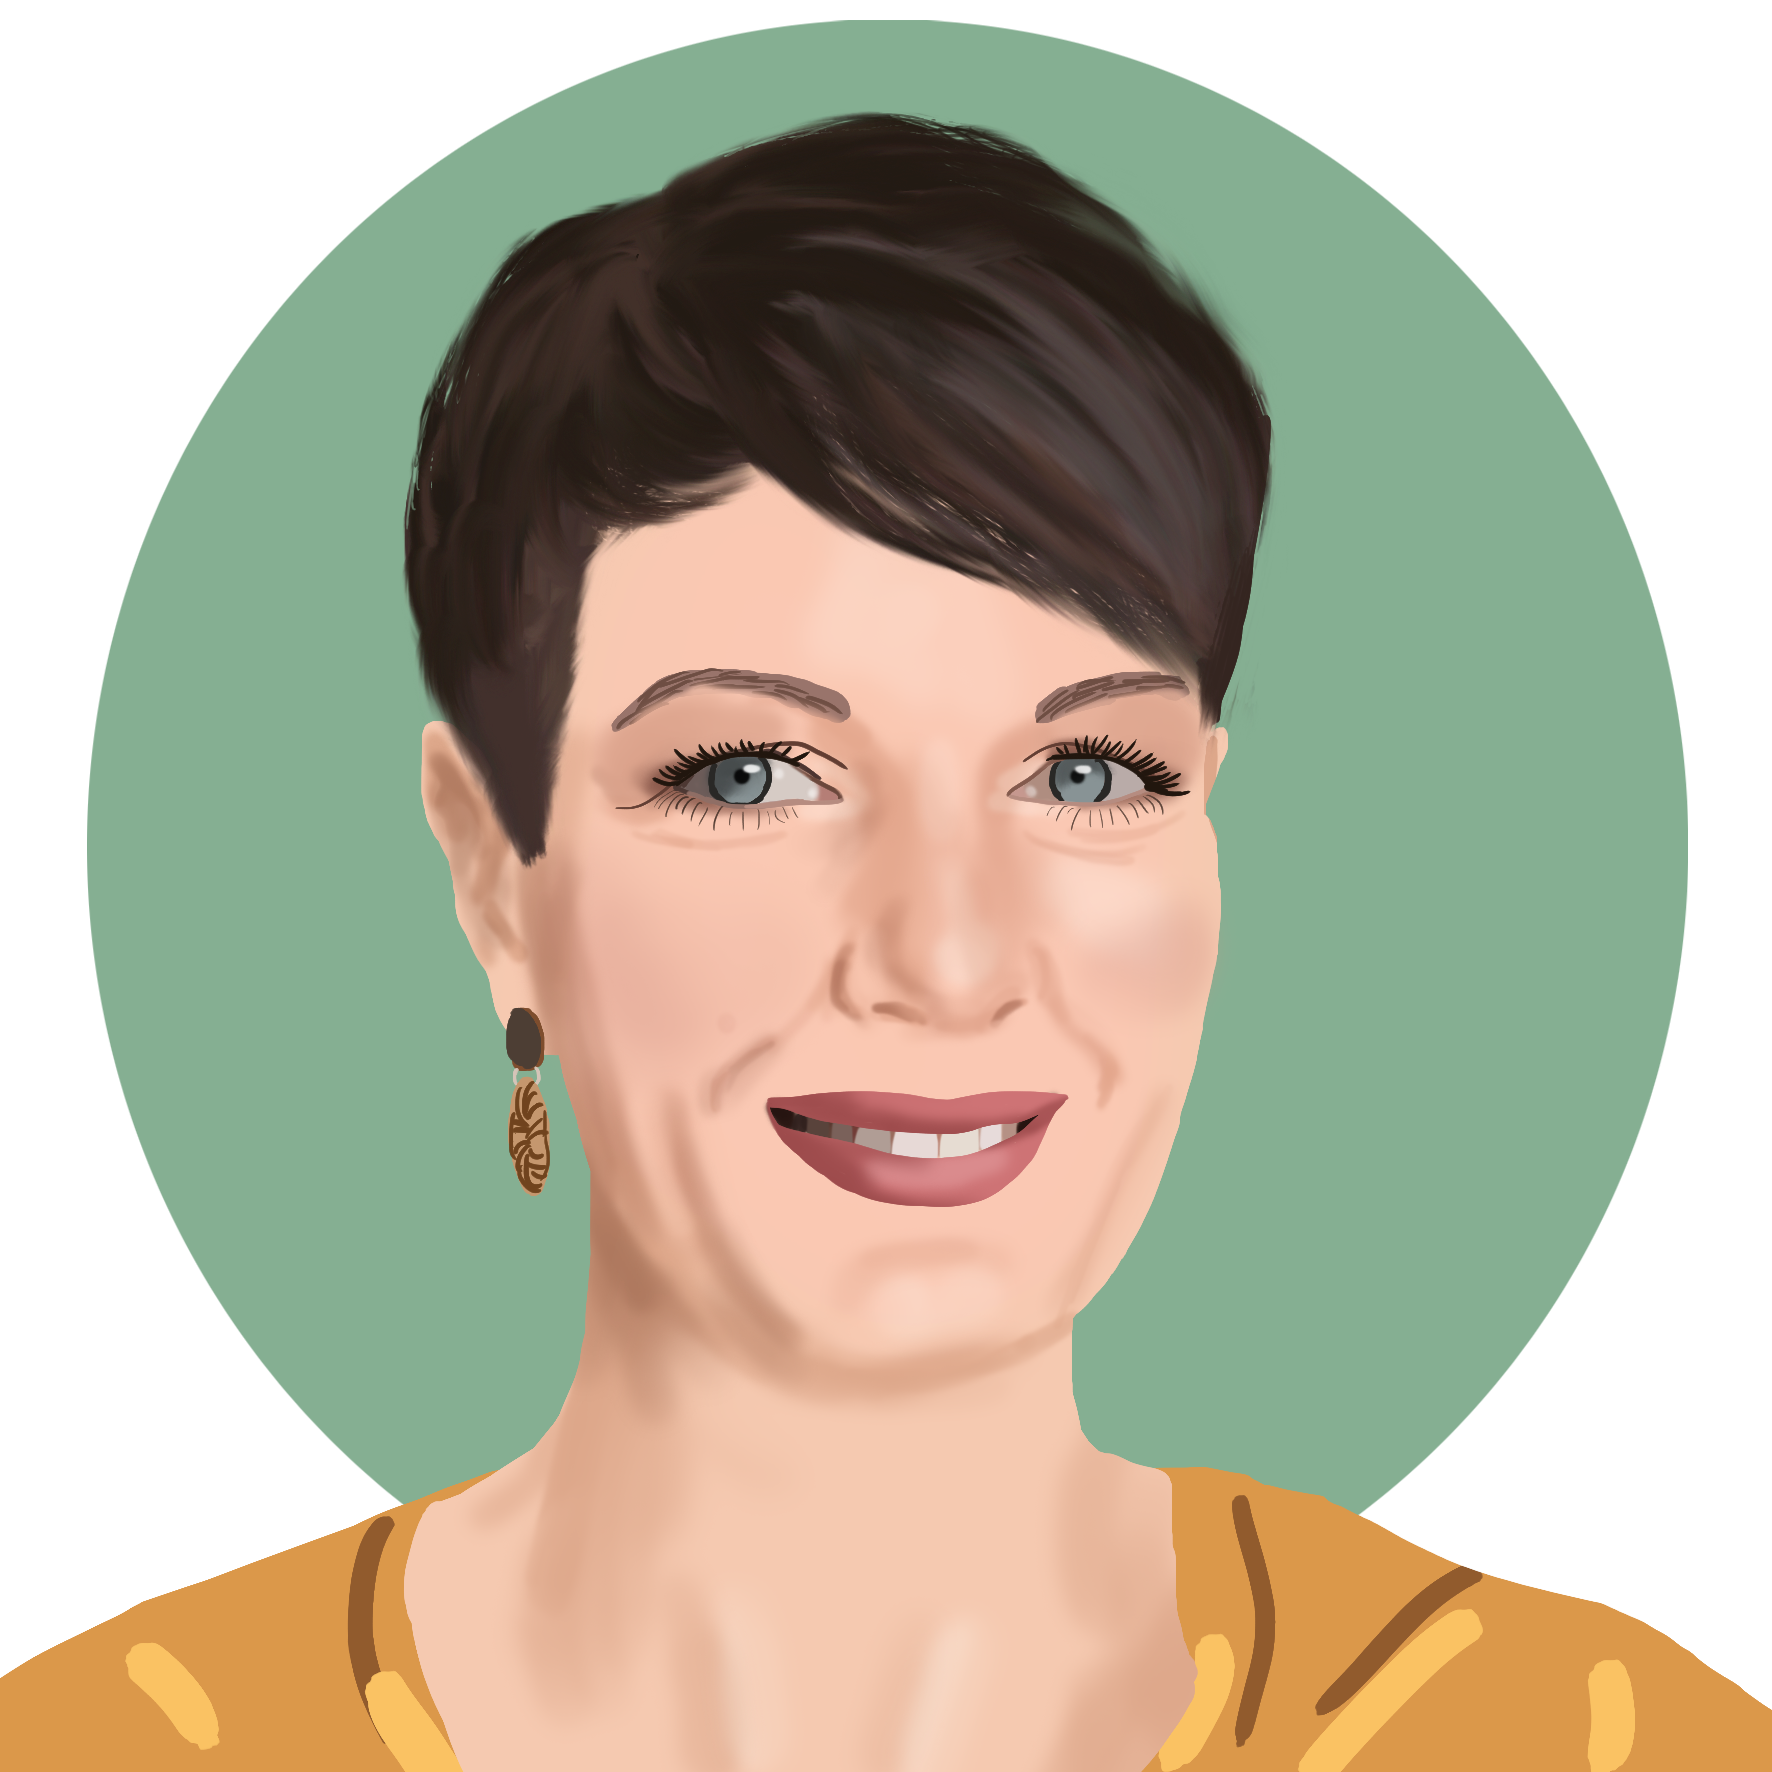 Profile illustration of Katja Karlsson with brown short hair, blue eyes and yellow top on a green circled background